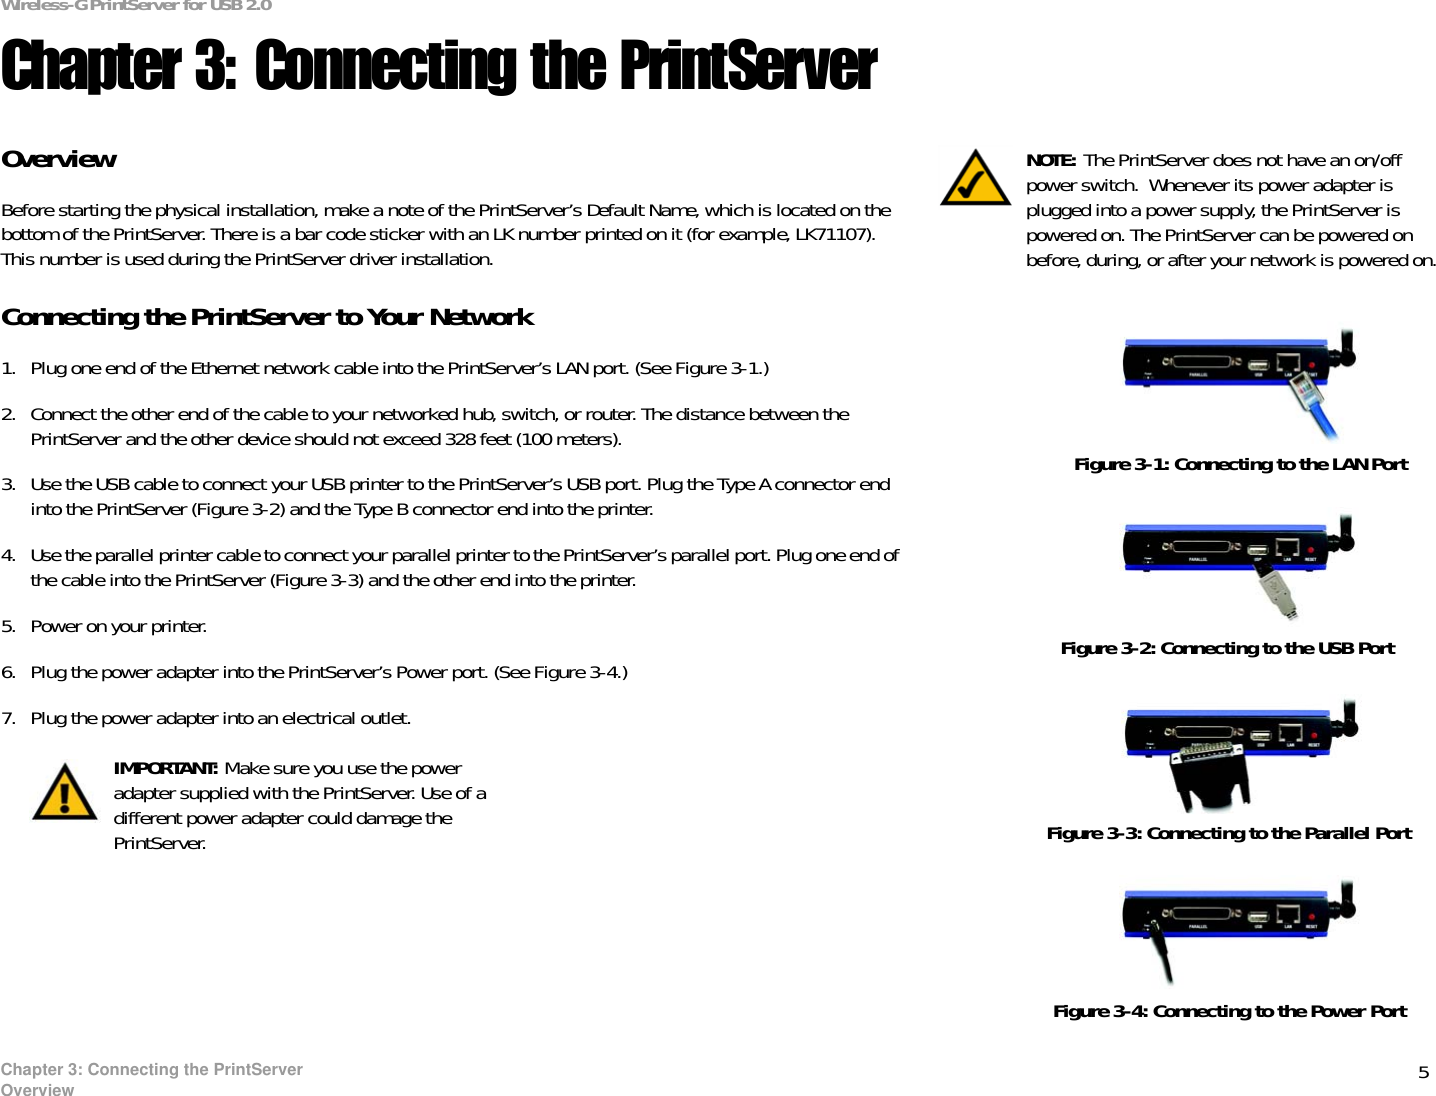 5Chapter 3: Connecting the PrintServerOverviewWireless-G PrintServer for USB 2.0Chapter 3: Connecting the PrintServer Overview Before starting the physical installation, make a note of the PrintServer’s Default Name, which is located on the bottom of the PrintServer. There is a bar code sticker with an LK number printed on it (for example, LK71107). This number is used during the PrintServer driver installation. Connecting the PrintServer to Your Network1. Plug one end of the Ethernet network cable into the PrintServer’s LAN port. (See Figure 3-1.)2. Connect the other end of the cable to your networked hub, switch, or router. The distance between the PrintServer and the other device should not exceed 328 feet (100 meters). 3. Use the USB cable to connect your USB printer to the PrintServer’s USB port. Plug the Type A connector end into the PrintServer (Figure 3-2) and the Type B connector end into the printer.4. Use the parallel printer cable to connect your parallel printer to the PrintServer’s parallel port. Plug one end of the cable into the PrintServer (Figure 3-3) and the other end into the printer.5. Power on your printer.6. Plug the power adapter into the PrintServer’s Power port. (See Figure 3-4.)7. Plug the power adapter into an electrical outlet.Figure 3-1: Connecting to the LAN PortNOTE: The PrintServer does not have an on/off power switch.  Whenever its power adapter is plugged into a power supply, the PrintServer is powered on. The PrintServer can be powered on before, during, or after your network is powered on. Figure 3-2: Connecting to the USB PortFigure 3-3: Connecting to the Parallel PortIMPORTANT: Make sure you use the power adapter supplied with the PrintServer. Use of a different power adapter could damage the PrintServer.Figure 3-4: Connecting to the Power Port